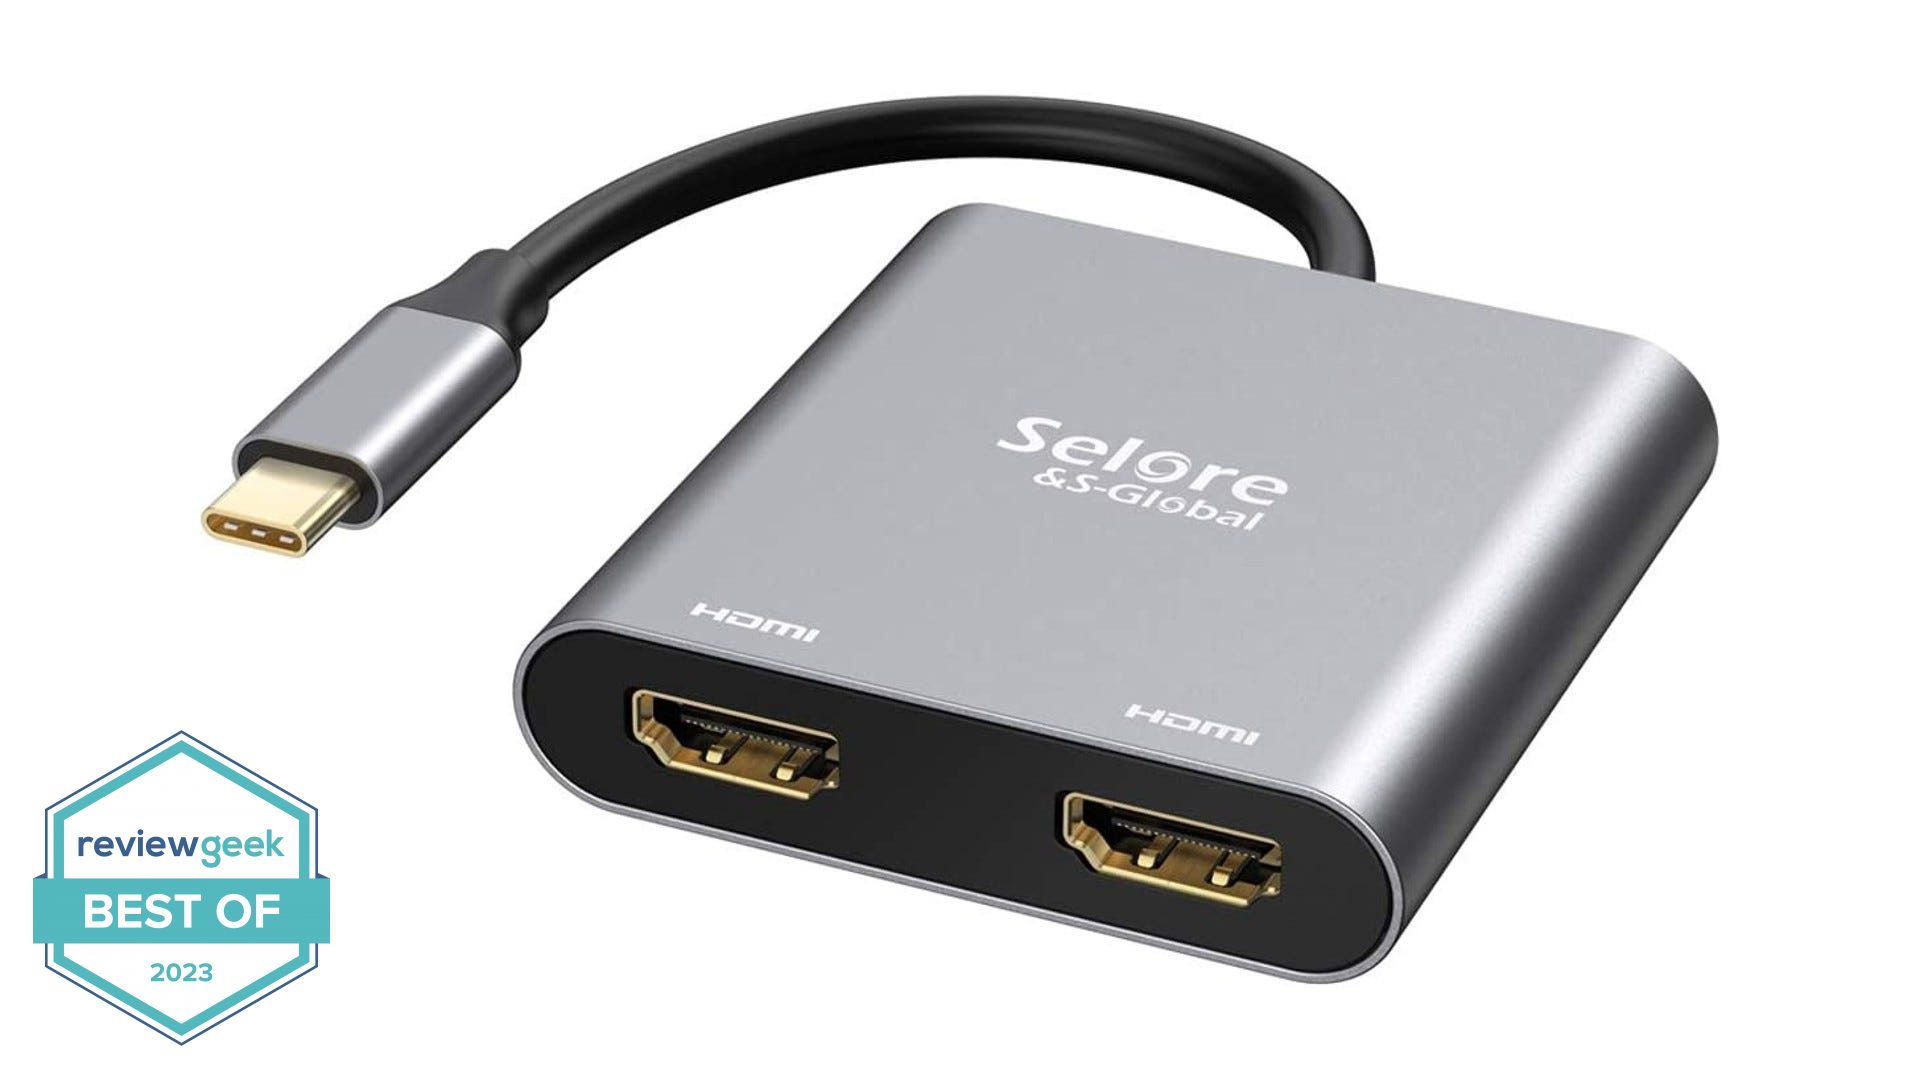 Selore S Global USB-C to Dual HDMI Adapter on a white background